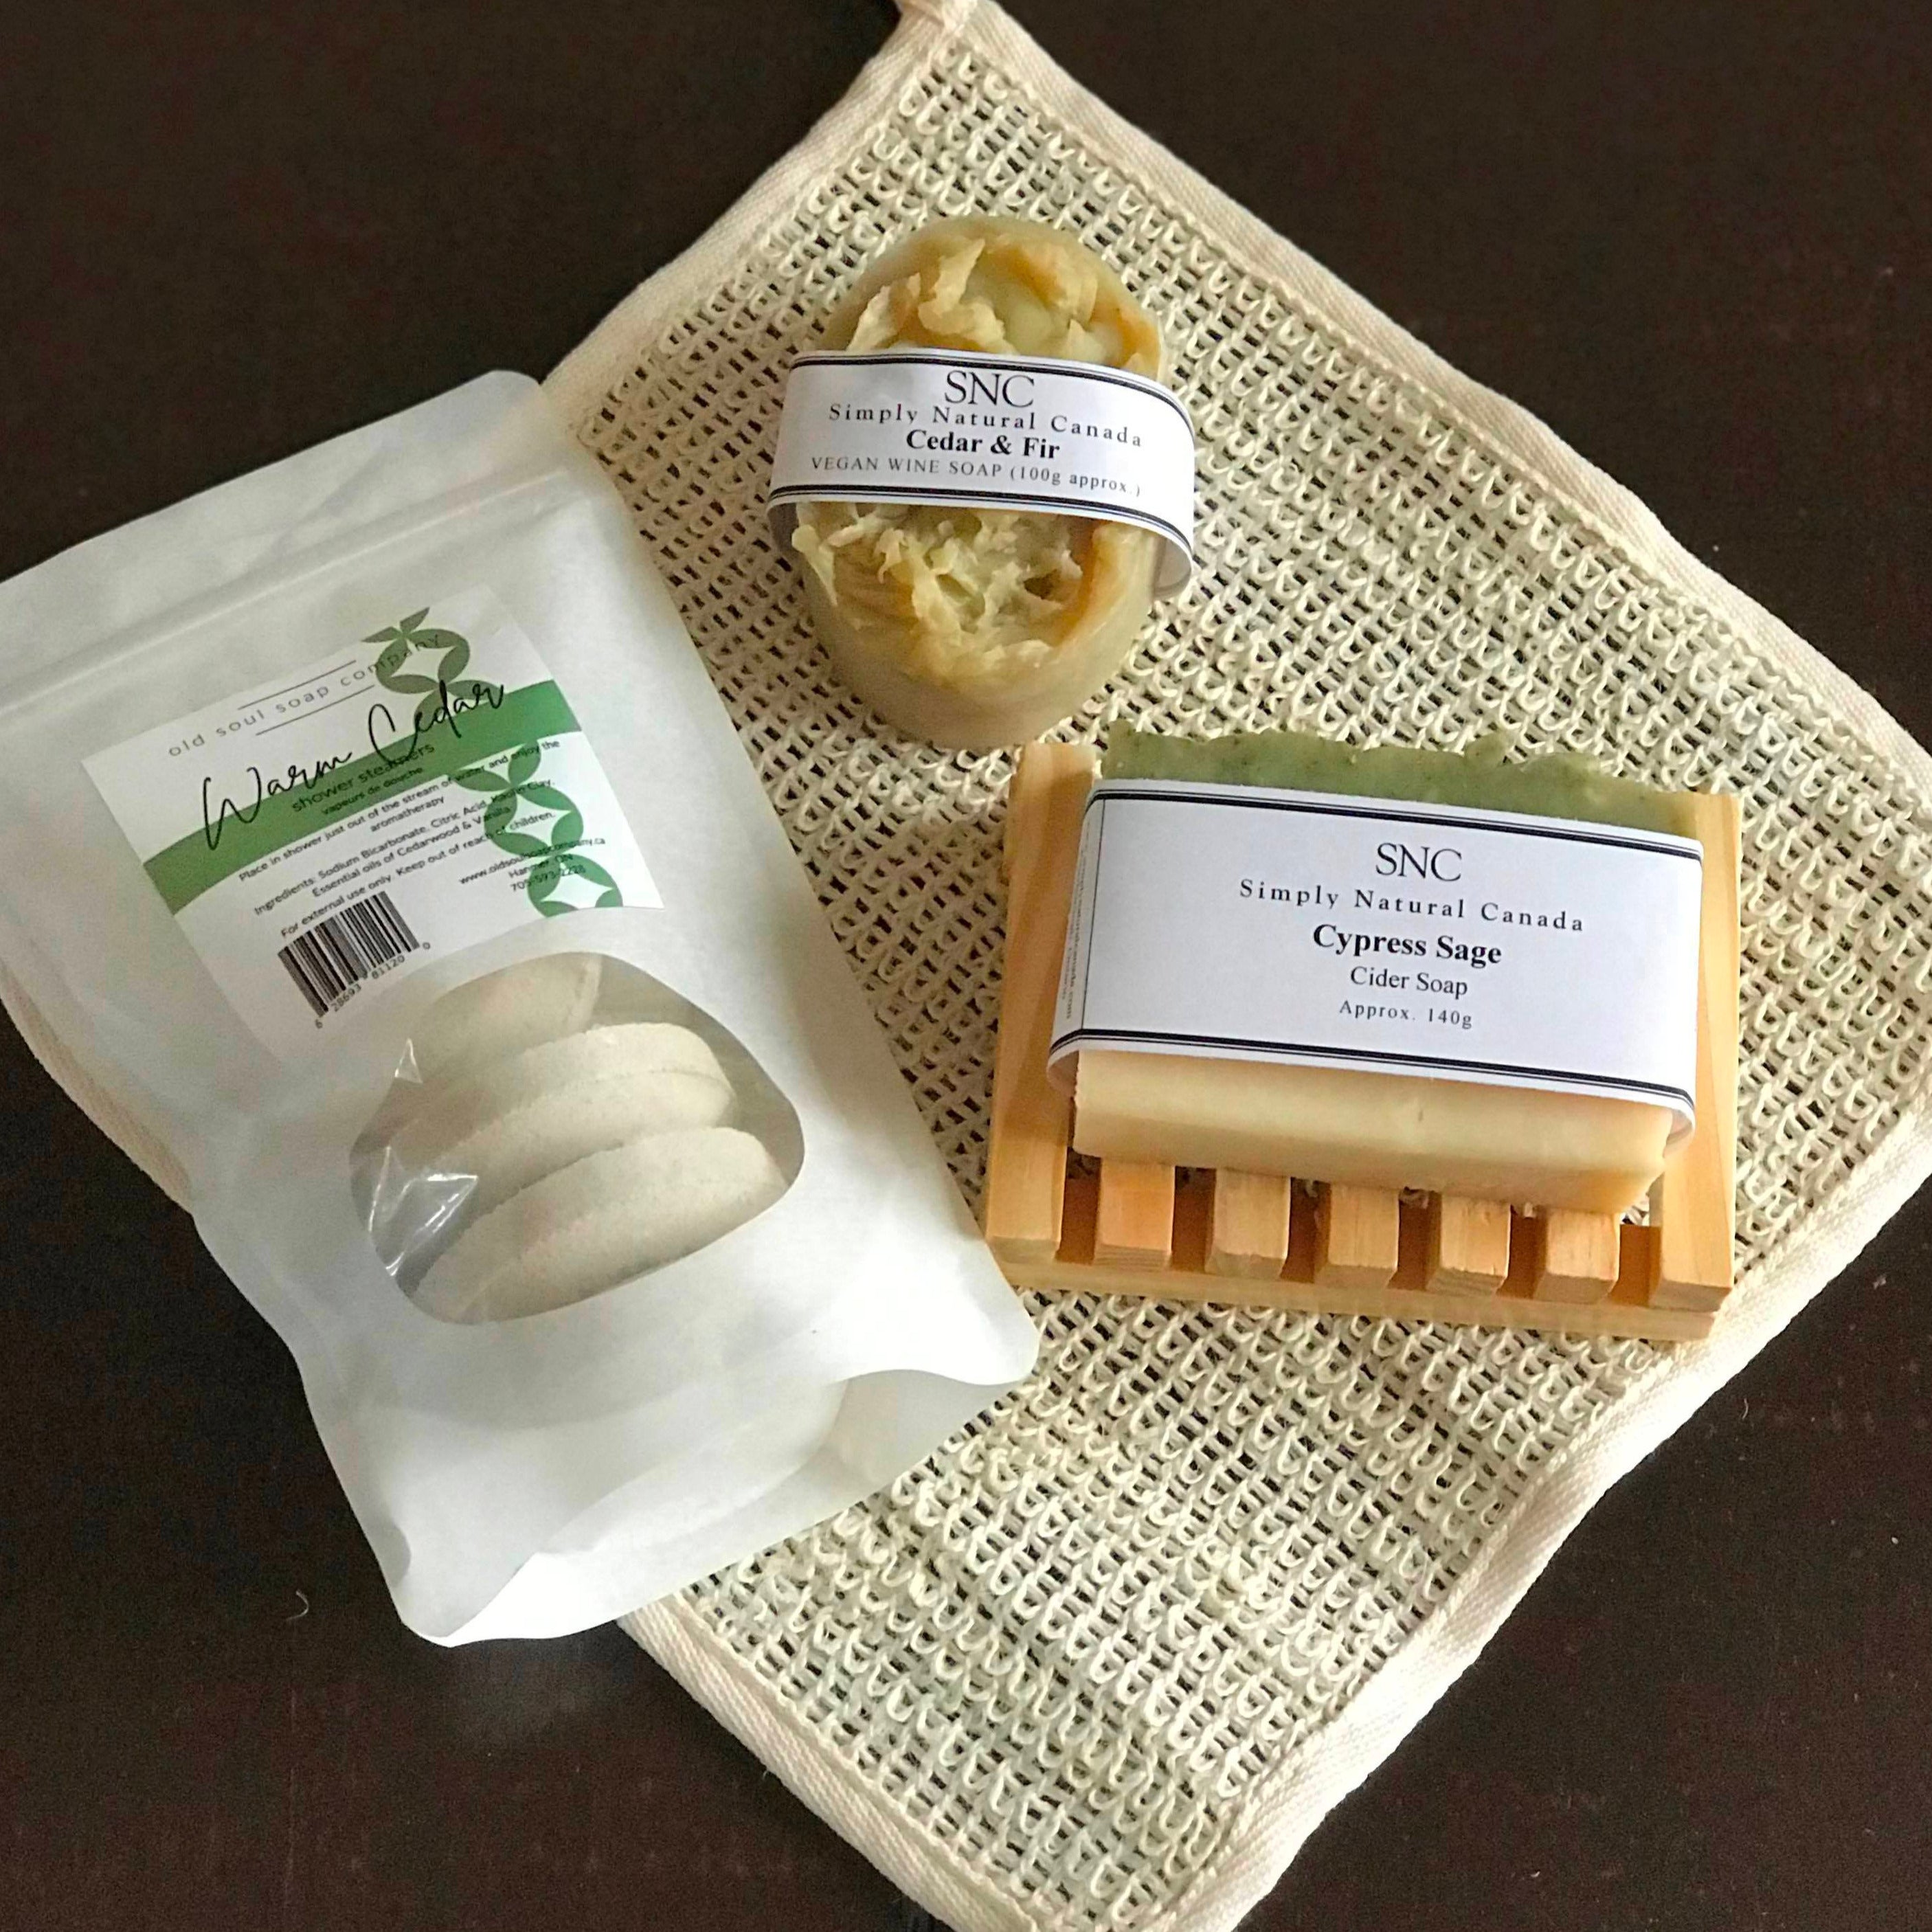 Love all the smell of being in the woods? If so, you may enjoy this Warm Cedar Gift Box featuring natural products from the Old Soul Soap Company and Simply Natural Canada (SNC) which is like taking a winter walk in the woods.